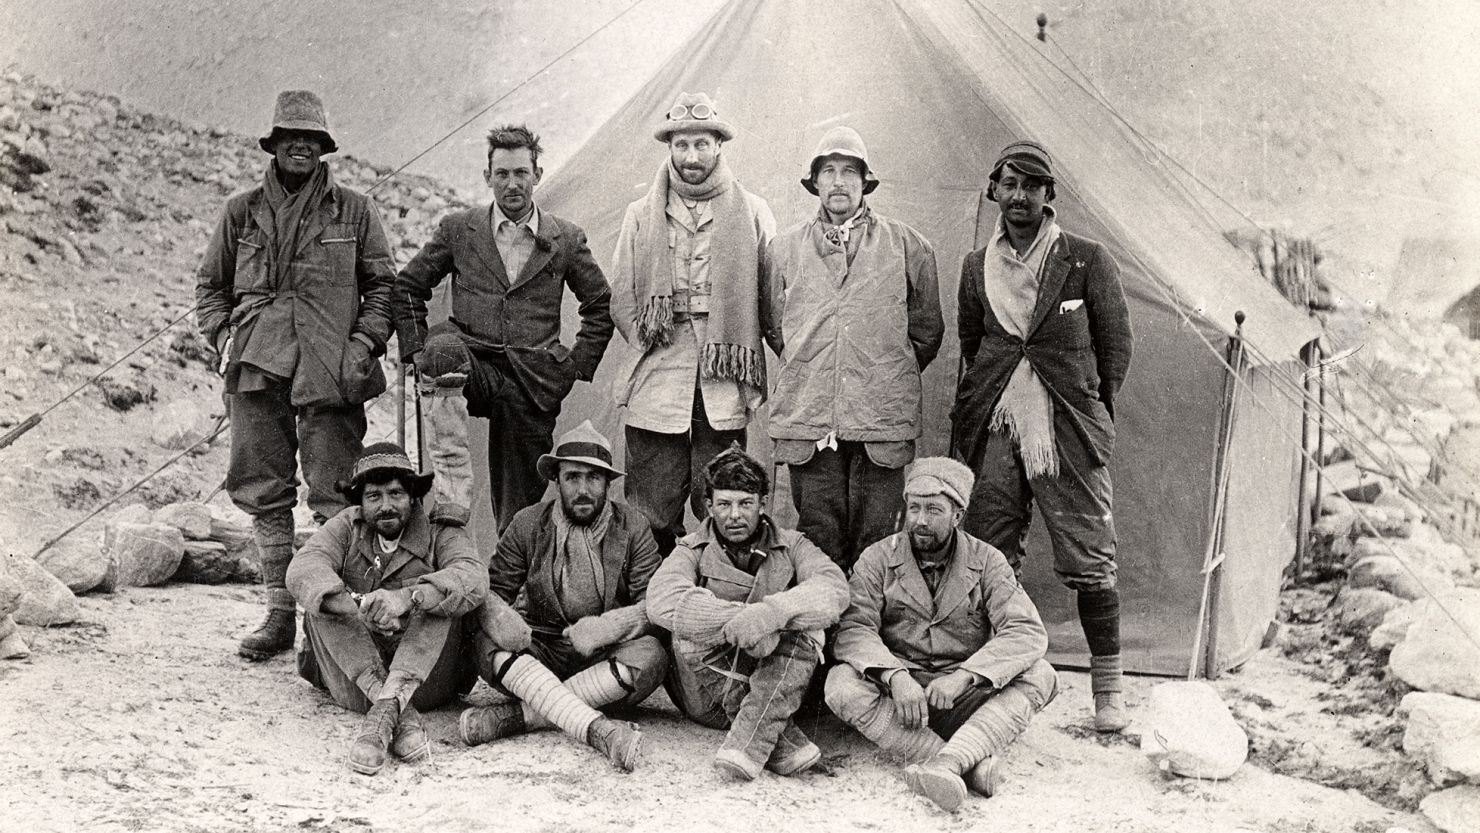 Andrew Irvine (back row, far left) and George Mallory (back row, second from left) were members of the 1924 British Mount Everest expedition. The two broke off from the team on June 8, 1924, in a push for the summit.